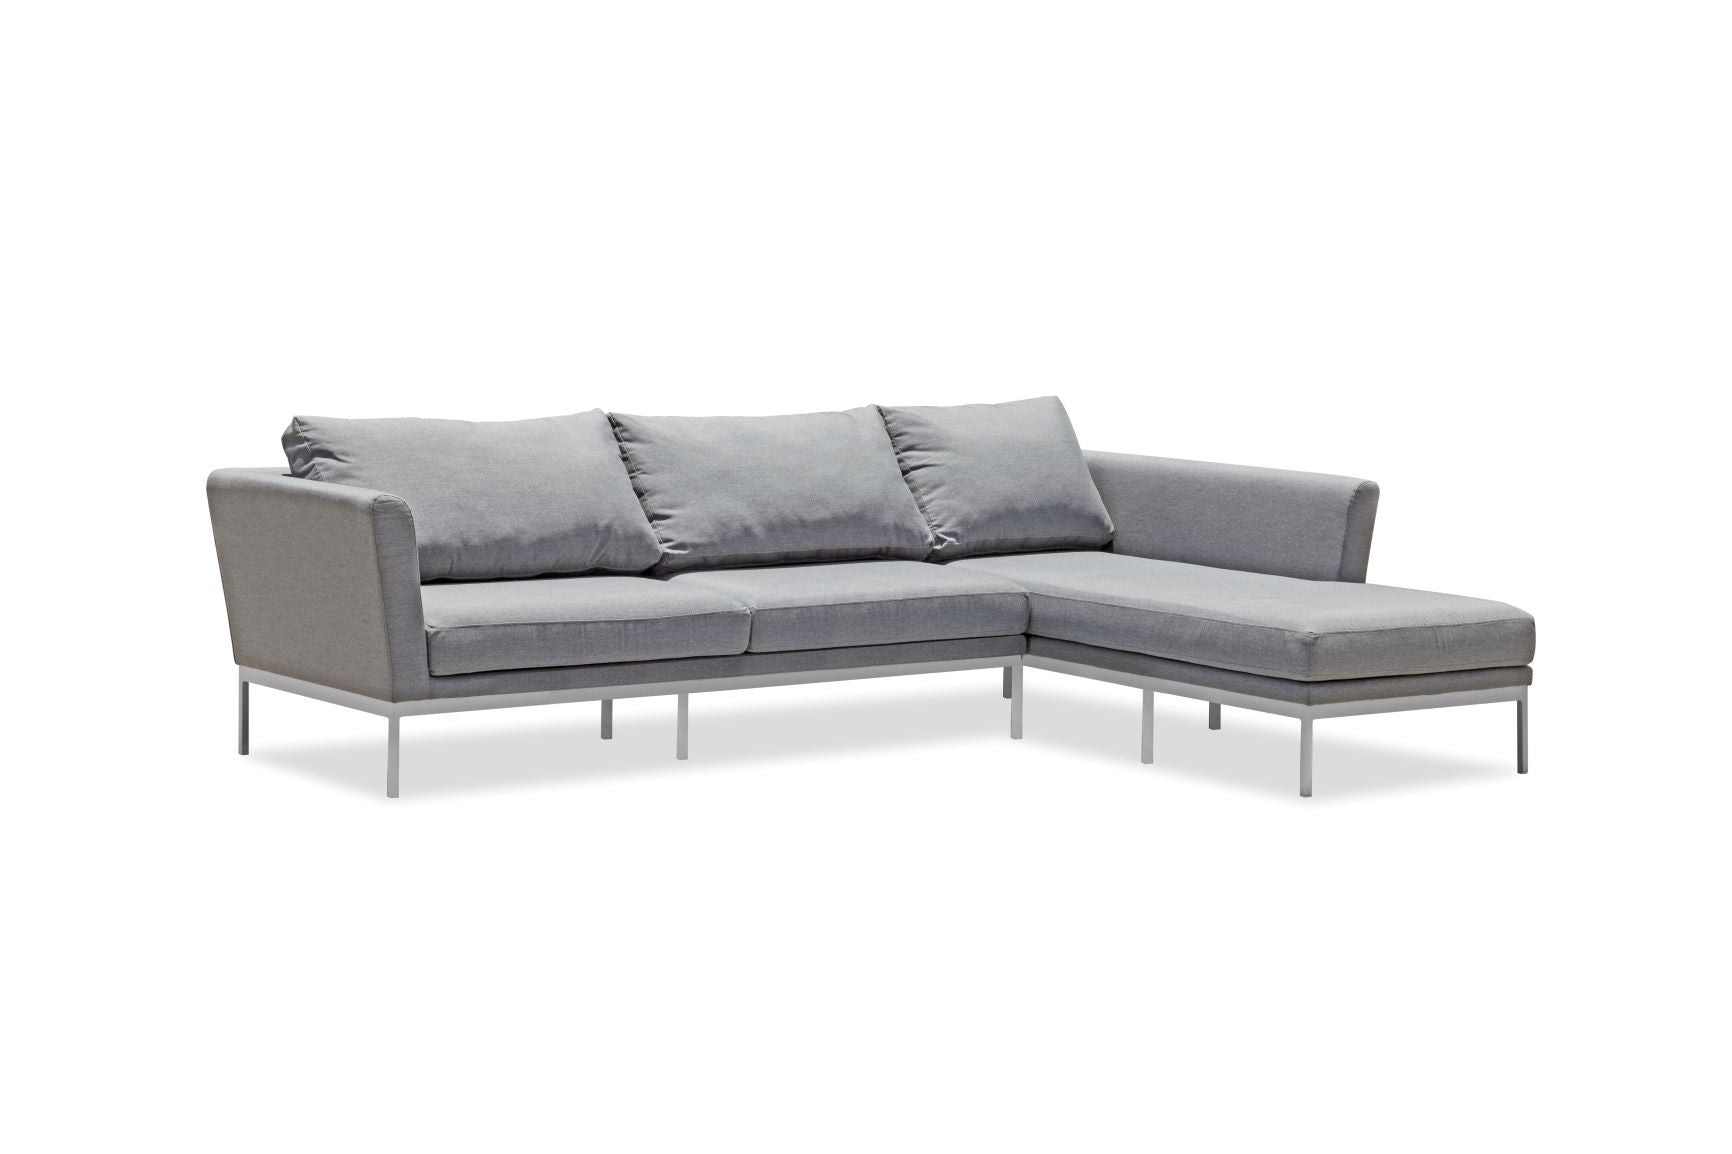 Whiteline Modern Living-Ursula Outdoor Right Facing Sectional-Outdoor Sectionals-MODTEMPO